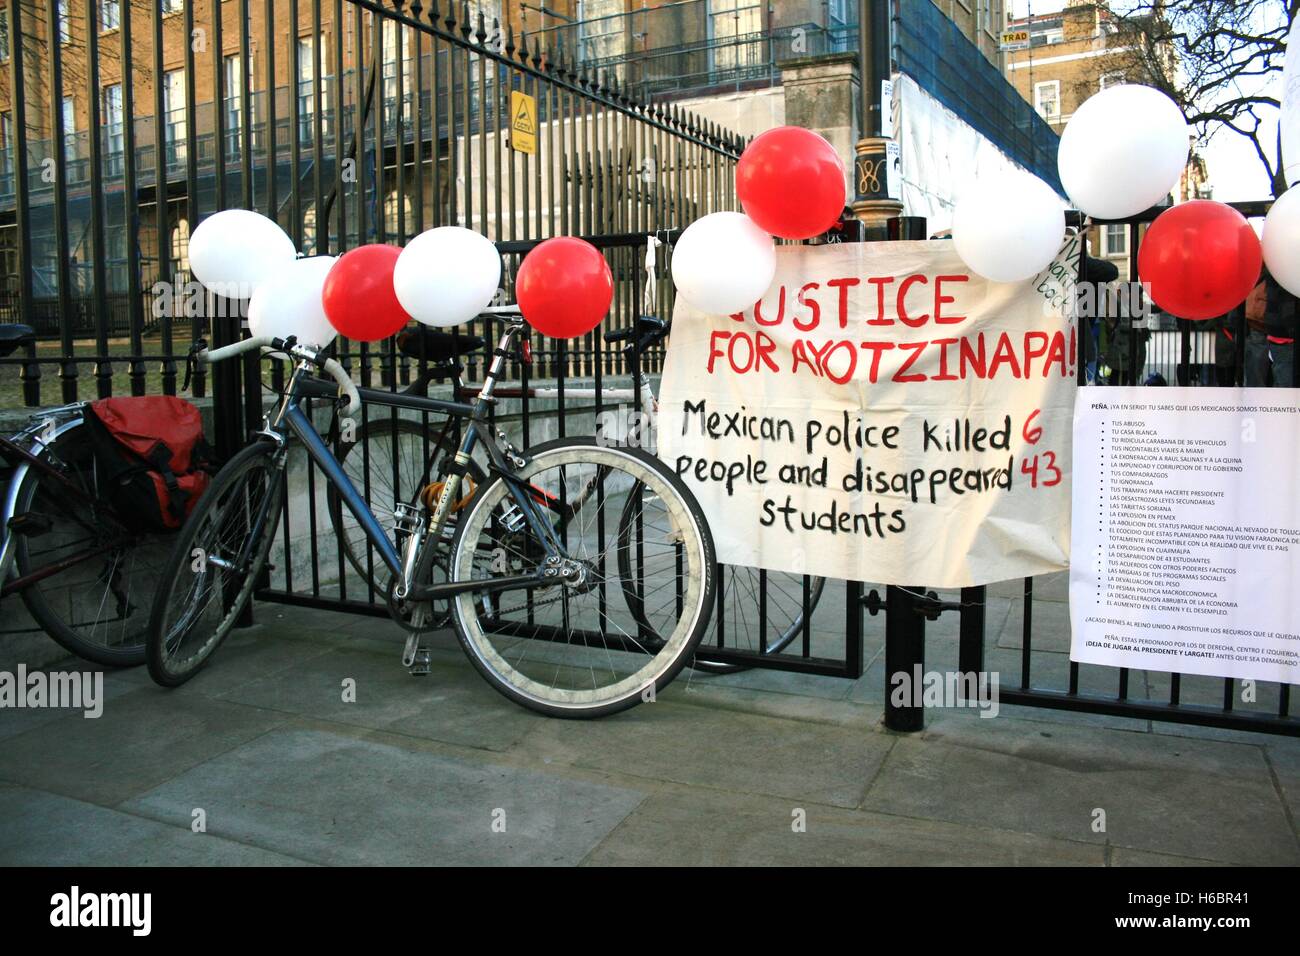 A pen reserved for protesters outside of Downing Street on Whitehall was covered in solidarity signs by protesters, who are drawing attention to the human rights abuses of the Mexican police, accused of killing 6 protesters and abducting 43 in the town of Ayotzinapa. Protesters have come to Downing Street as President Peña Nieto of Mexico makes a state visit to the UK. Stock Photo